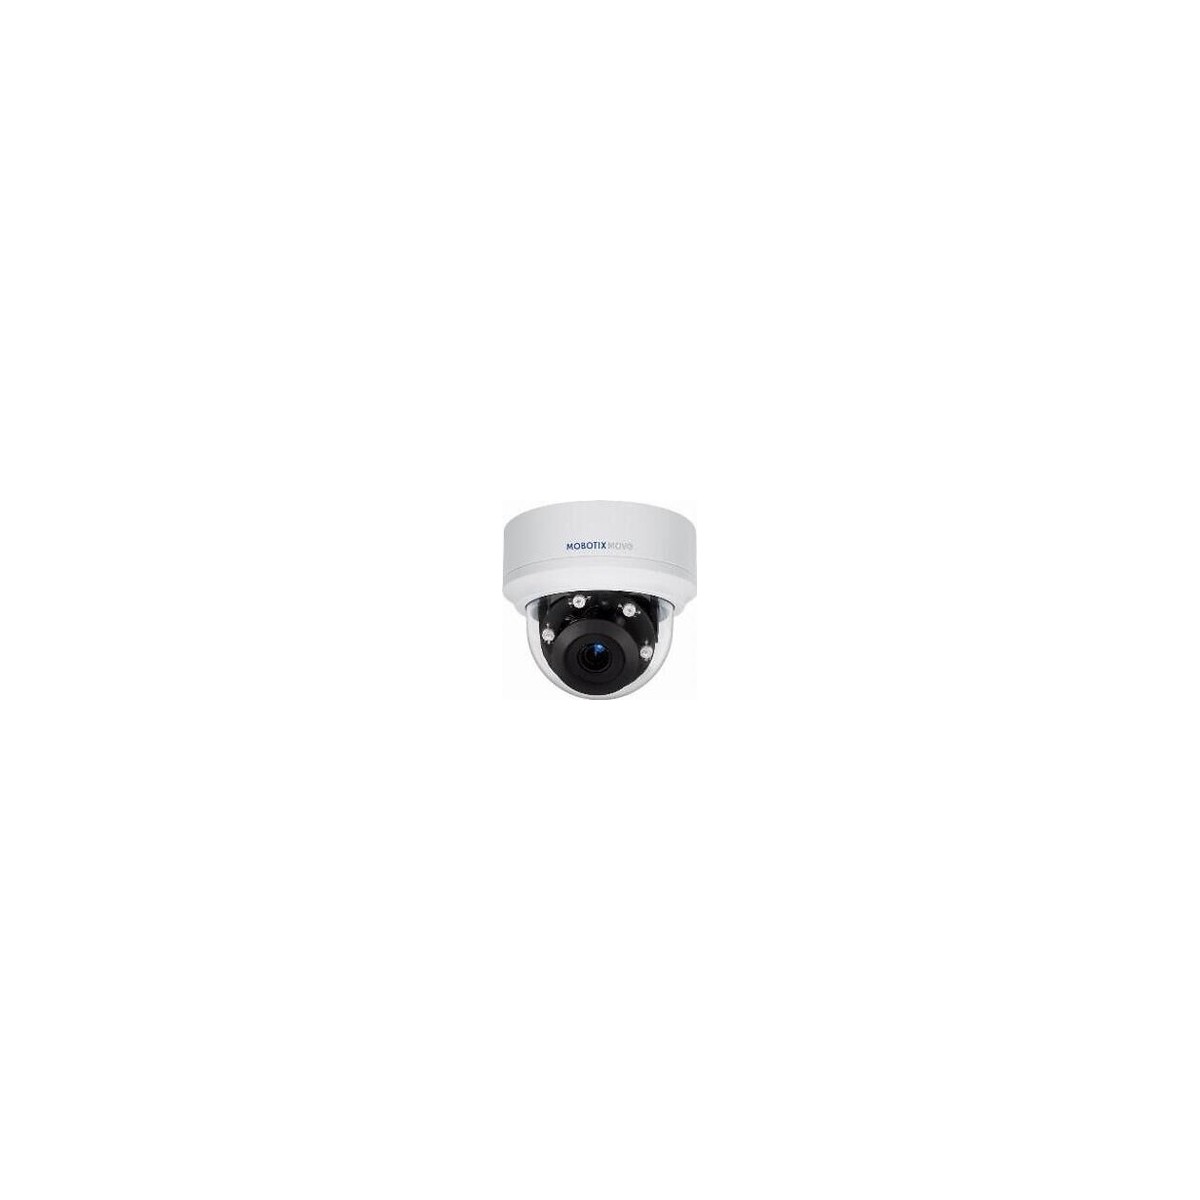 Mobotix Move - IP security camera - Indoor  outdoor - Wired - Ceiling - Black - White - Dome